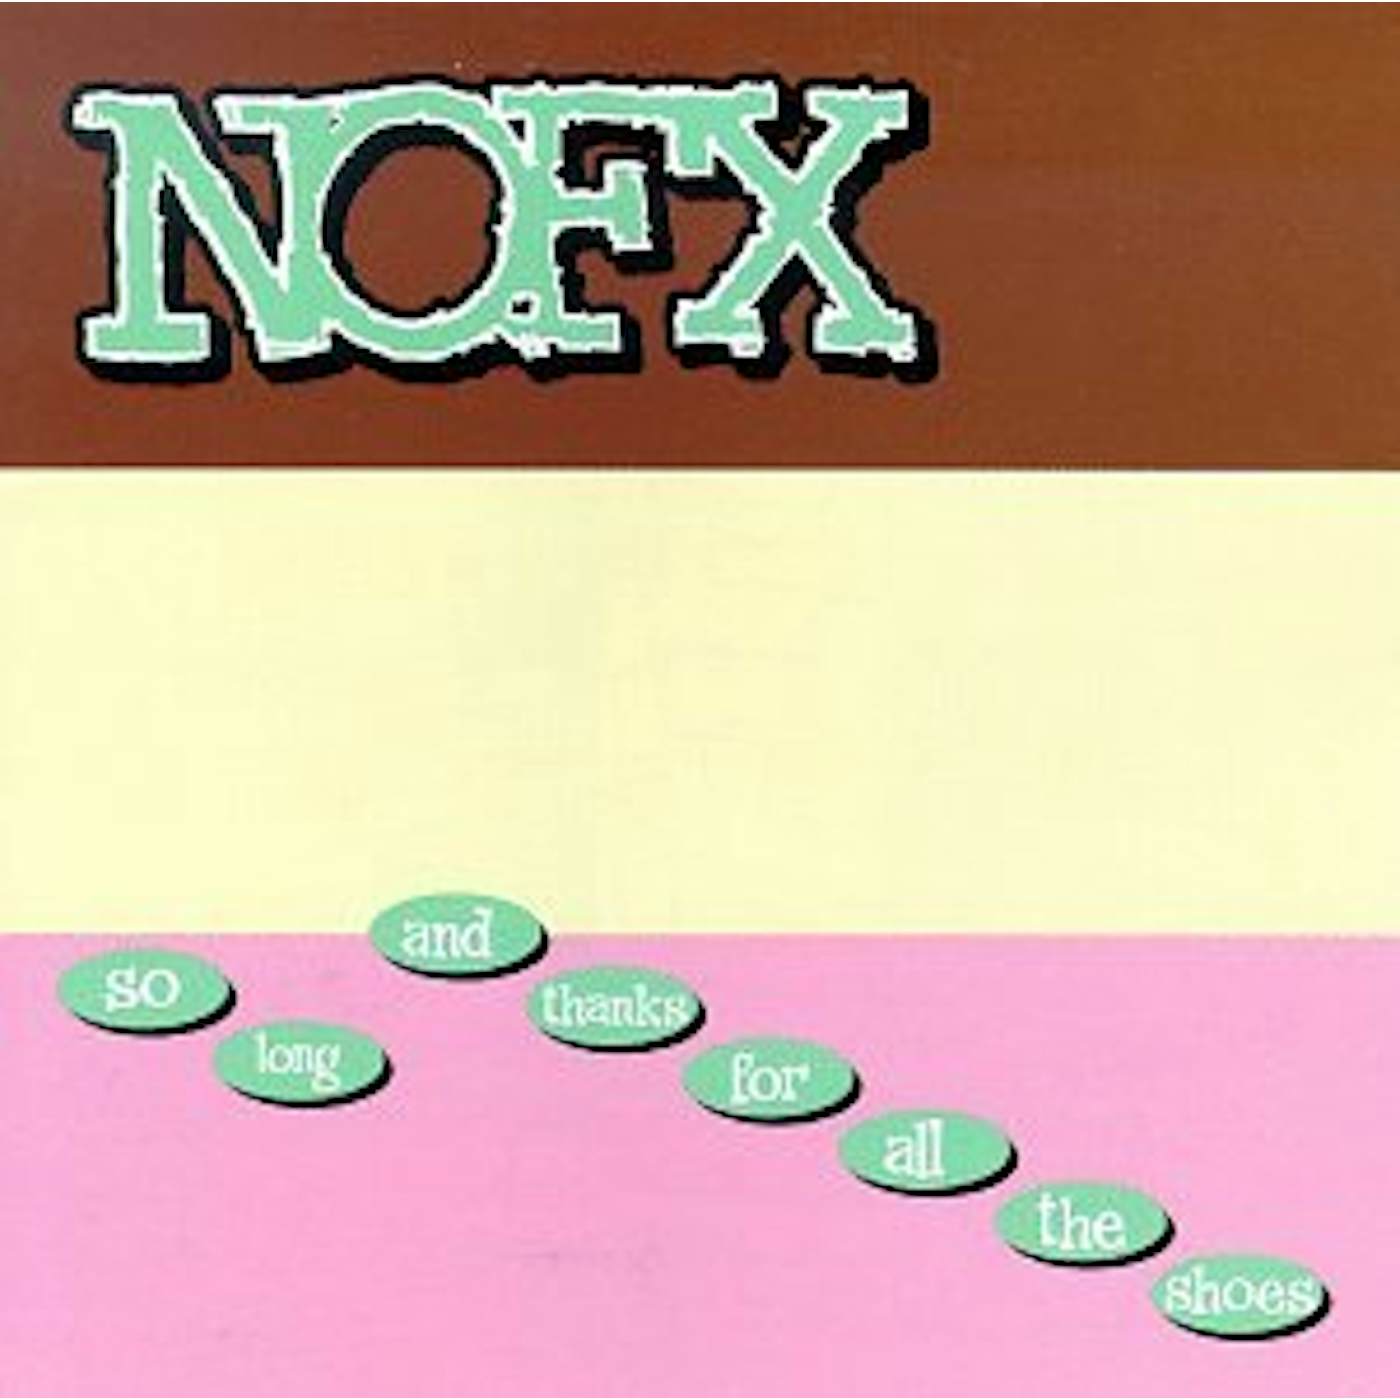 NOFX So Long & Thanks For All The Shoes Vinyl Record